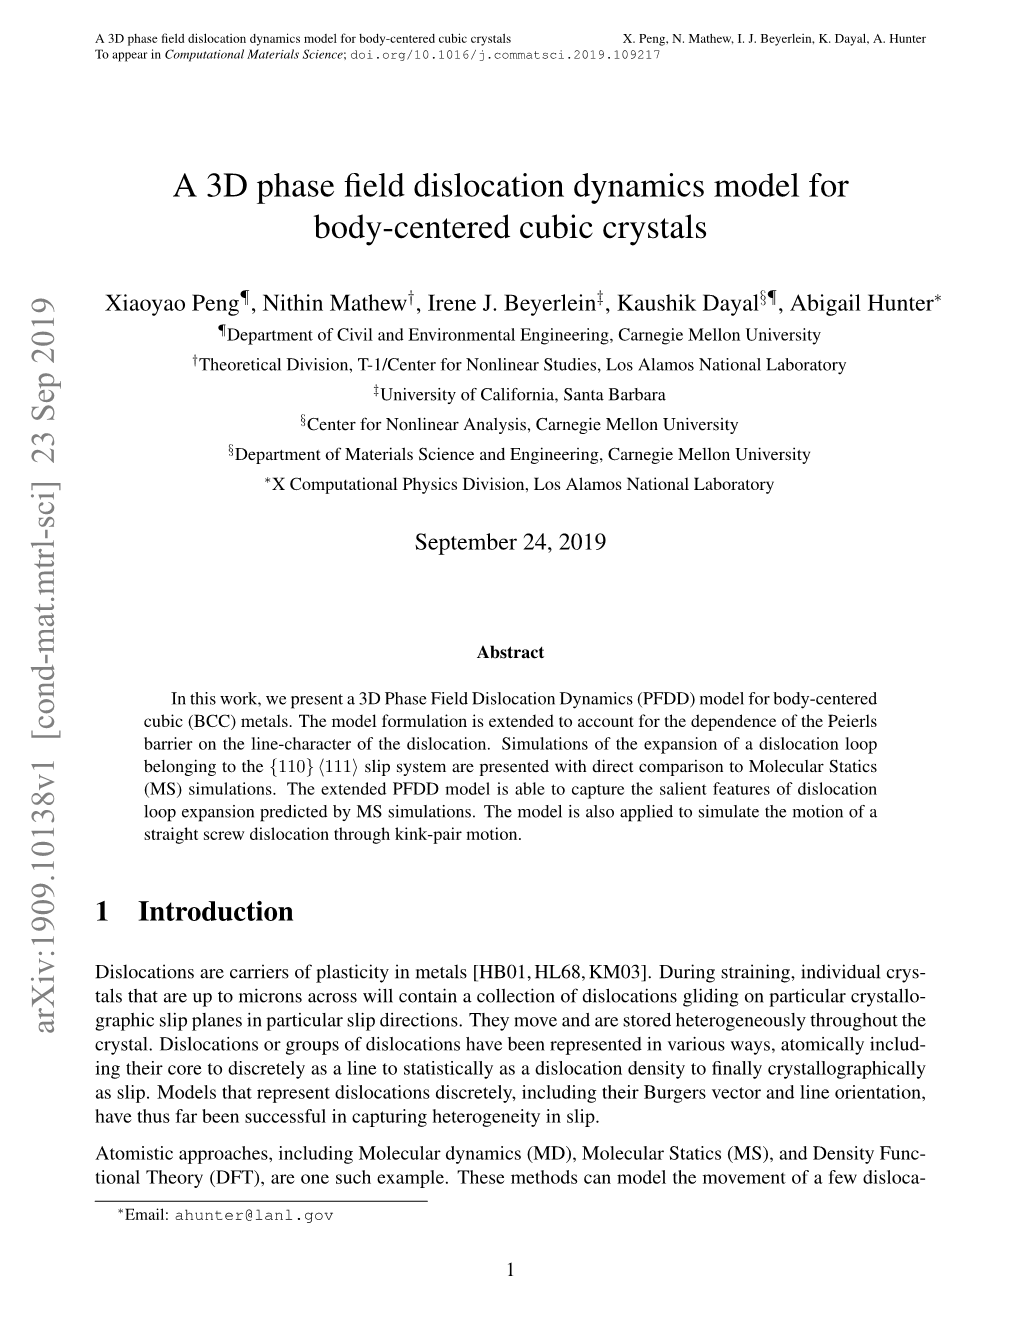 A 3D Phase Field Dislocation Dynamics Model for Body-Centered Cubic